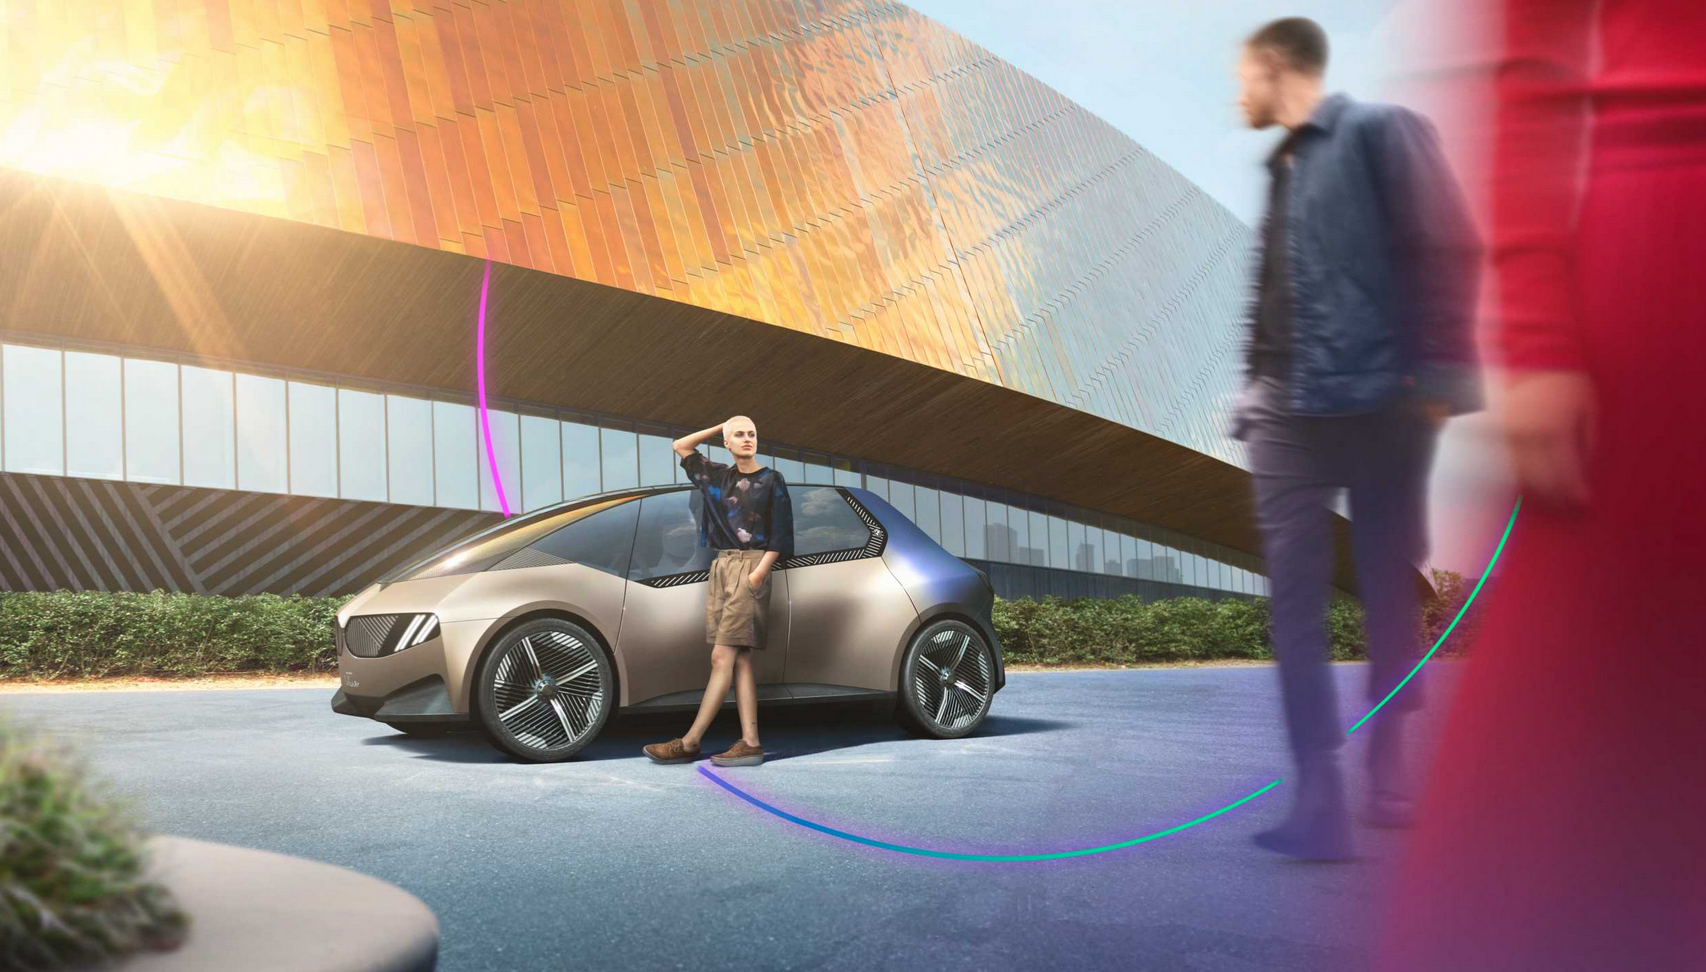 BMW goes circular at IAA Mobility in Munich